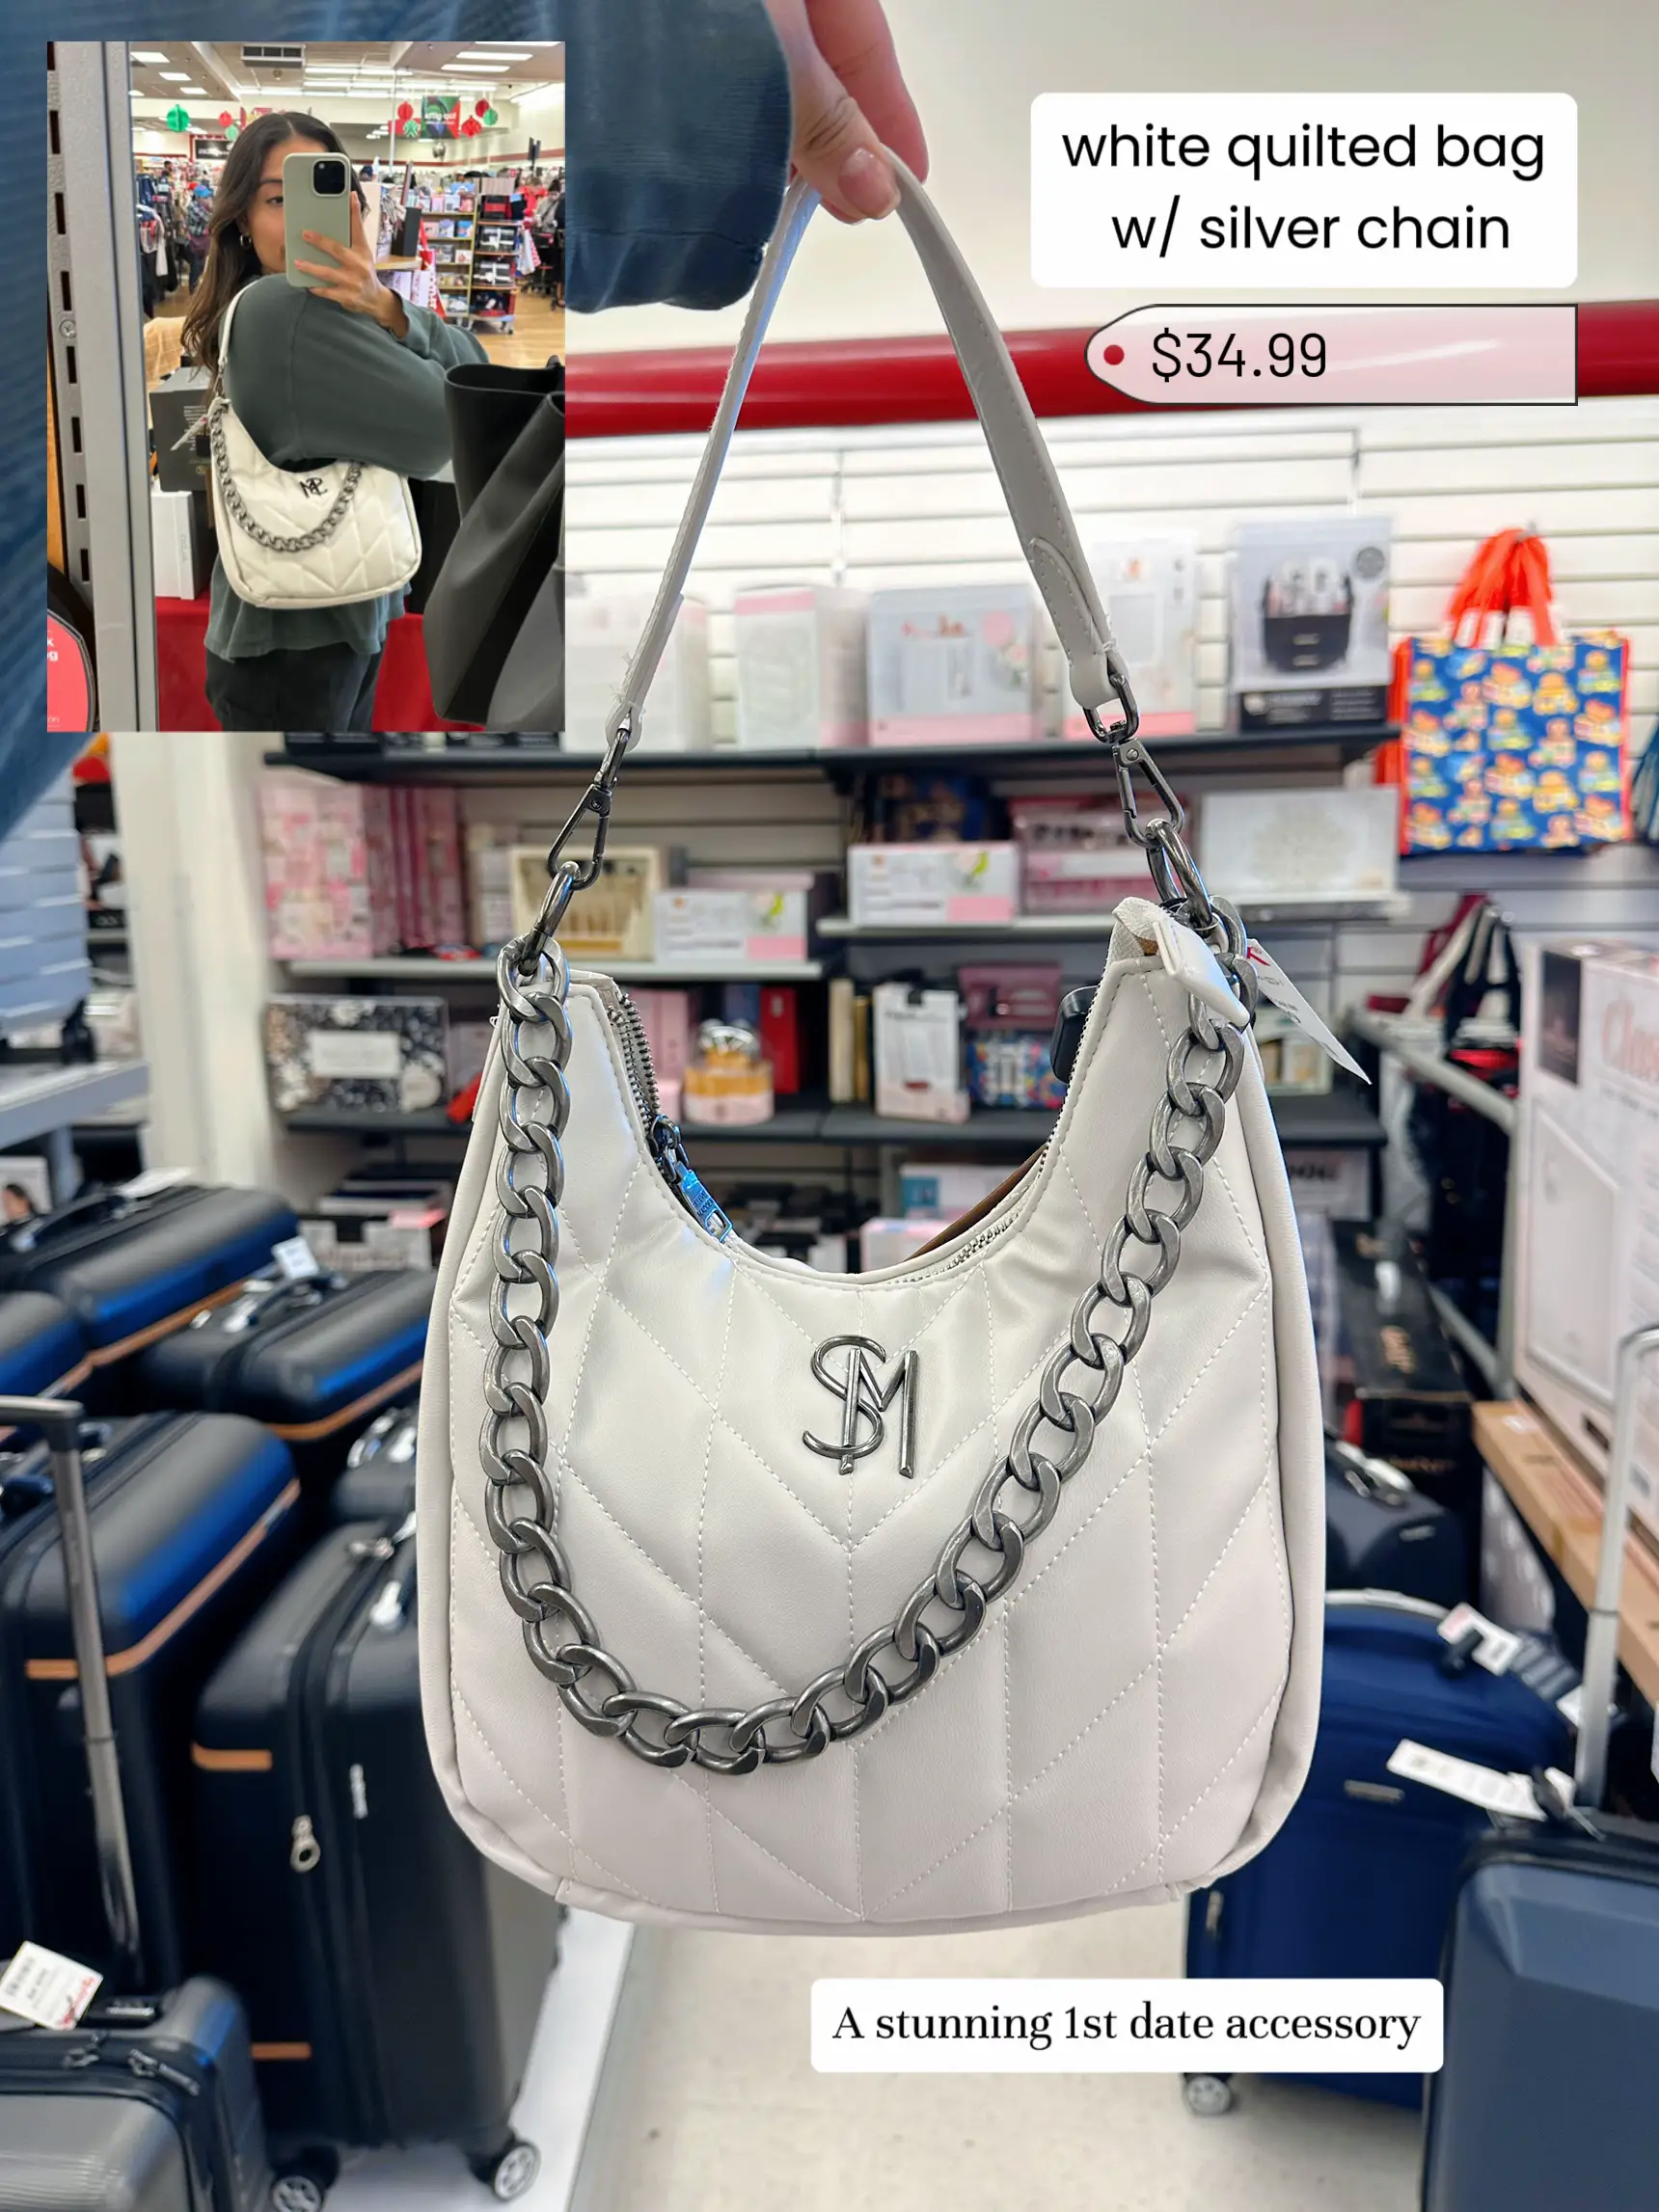  A white quilted bag with a silver chain and a price of $34.99.